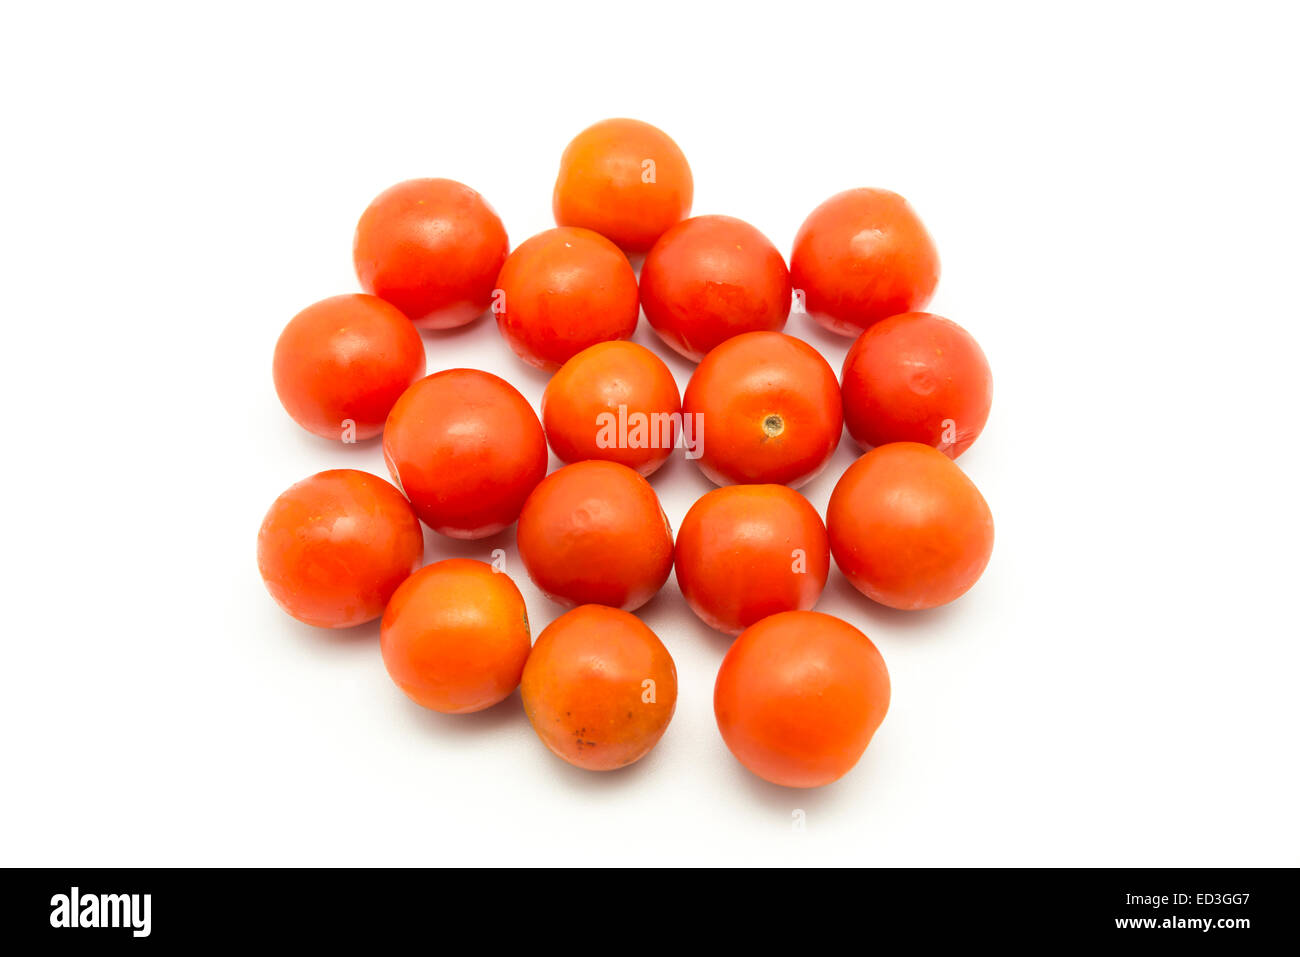 small tomatoes on a white background Stock Photo